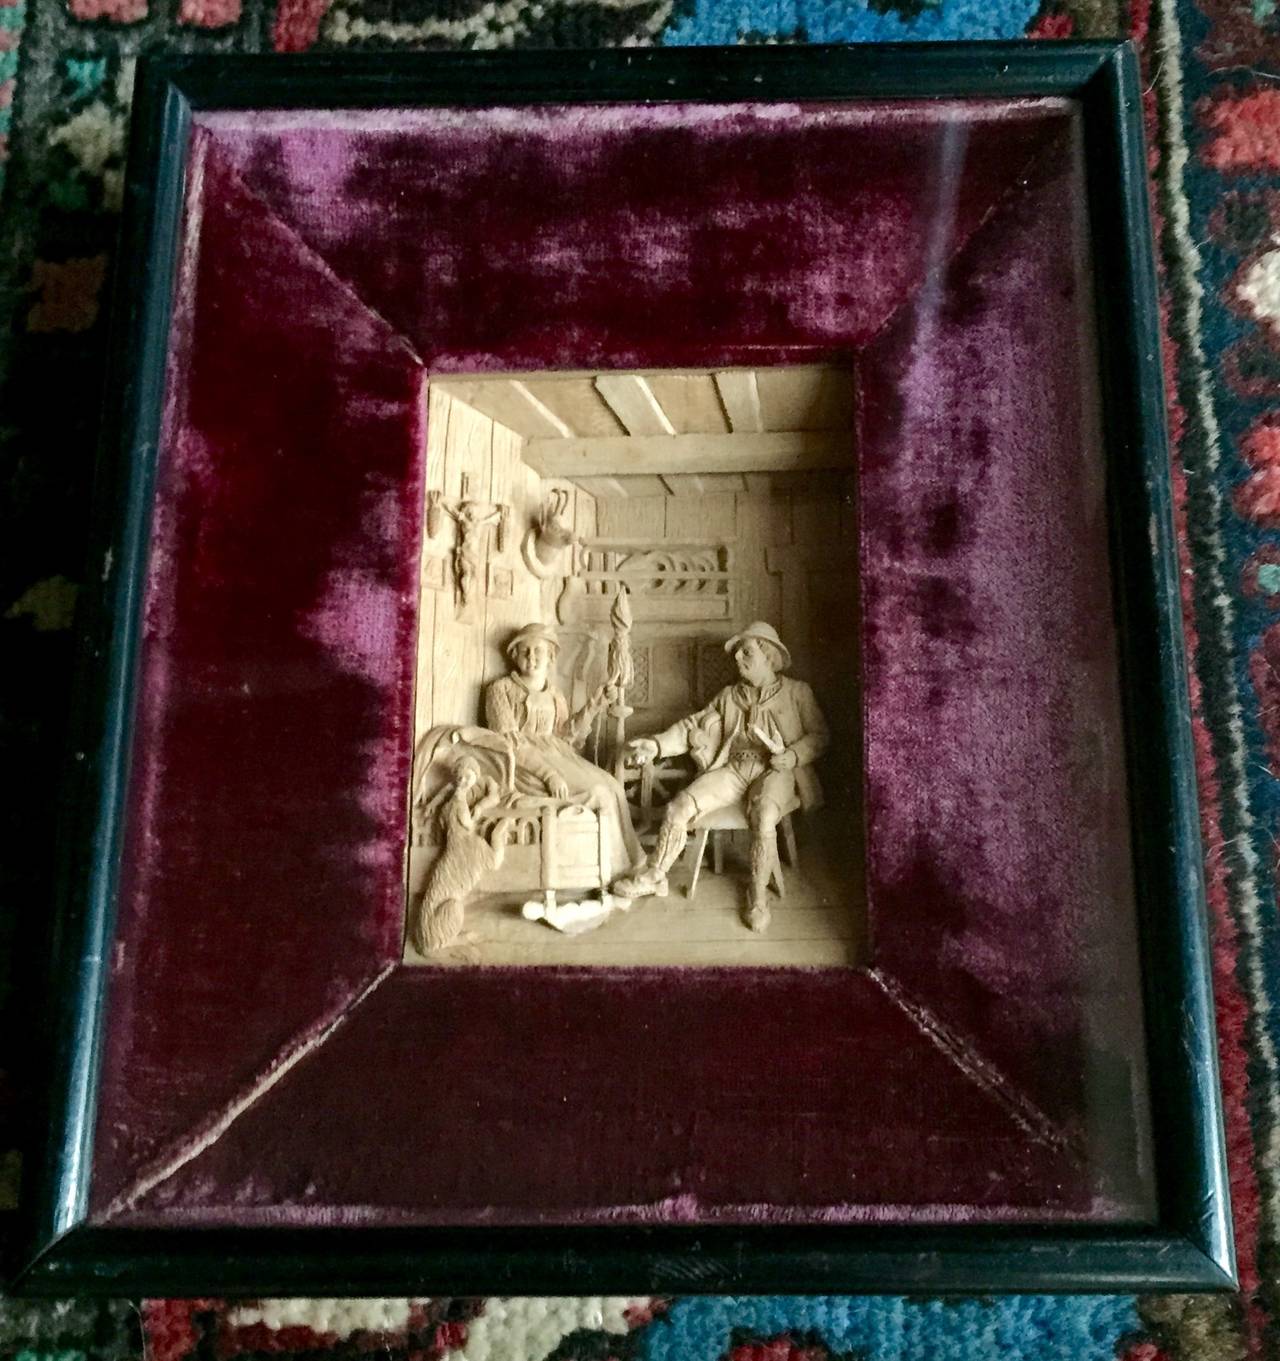 C. 1900
Could be carved by Steiner
Presented in velvet cased shadow box